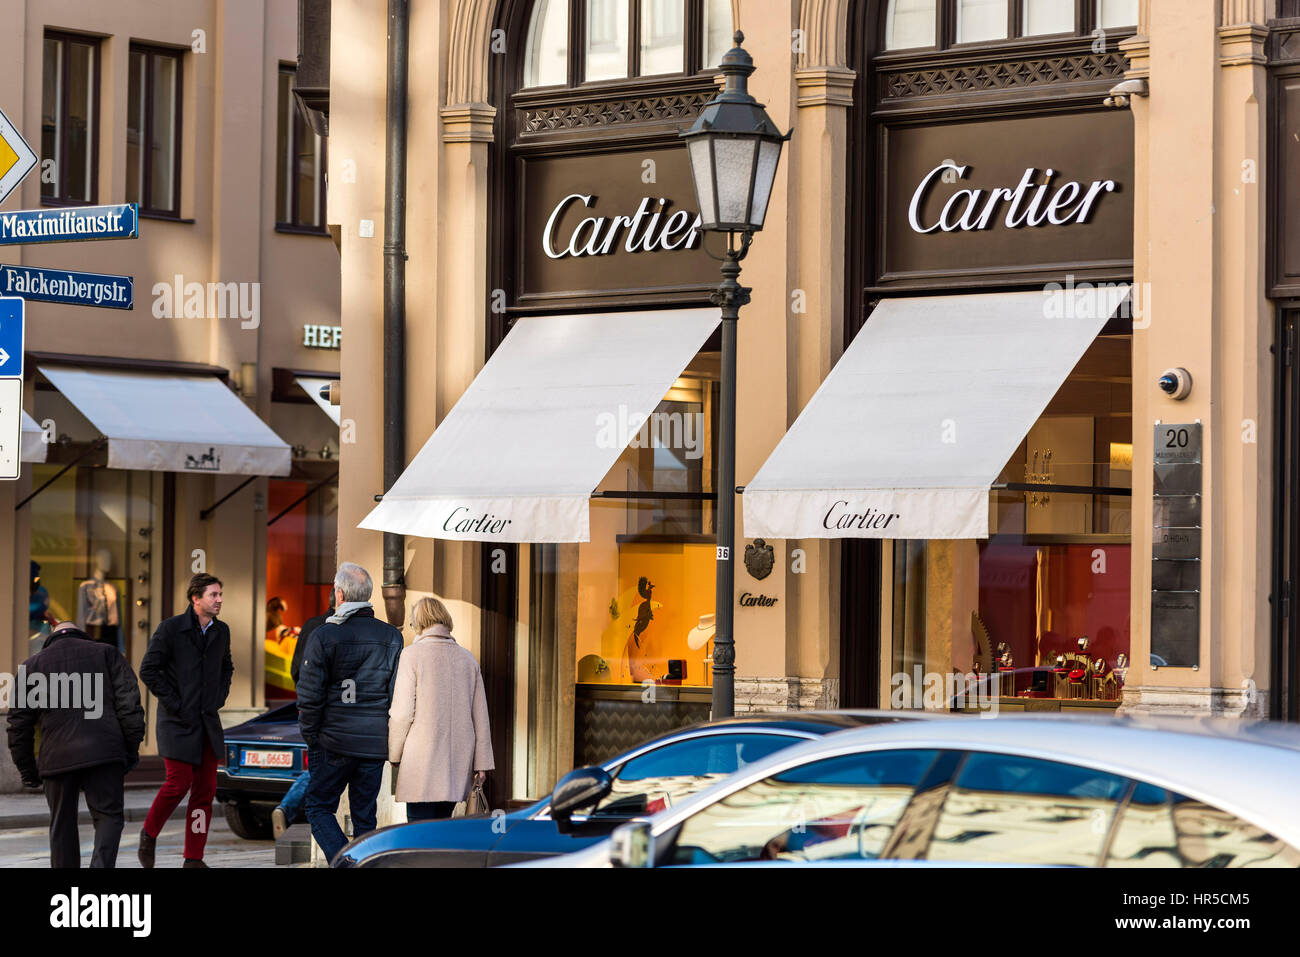 cartier shops germany